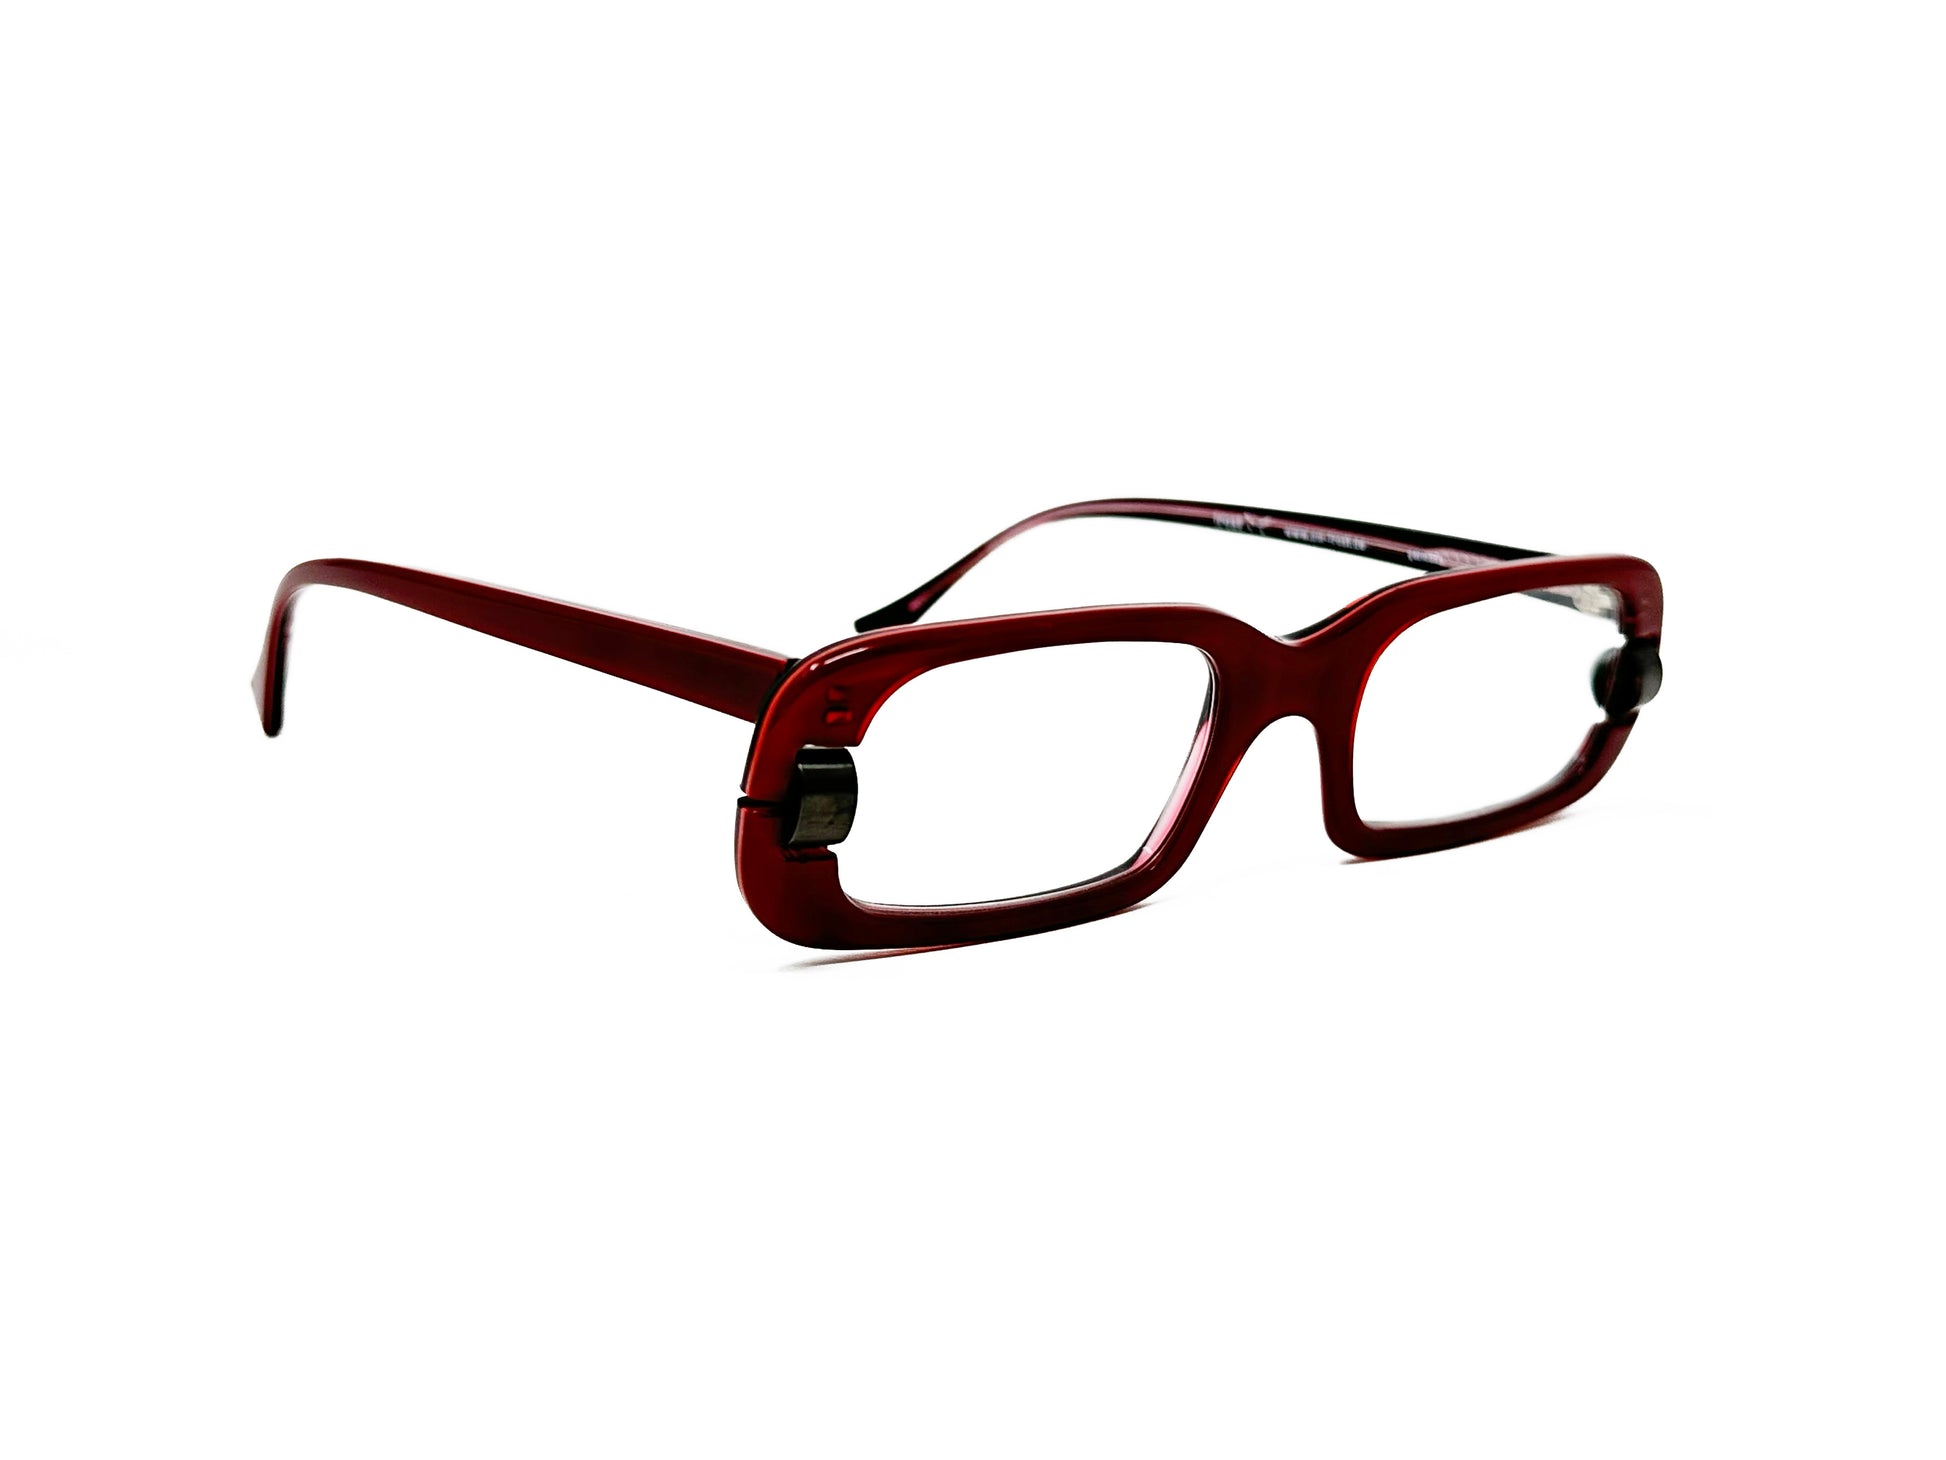 Frost bubble-rectangular, acetate, optical frames. Model: Ring. Color: C177 - Dark Red. Side view.